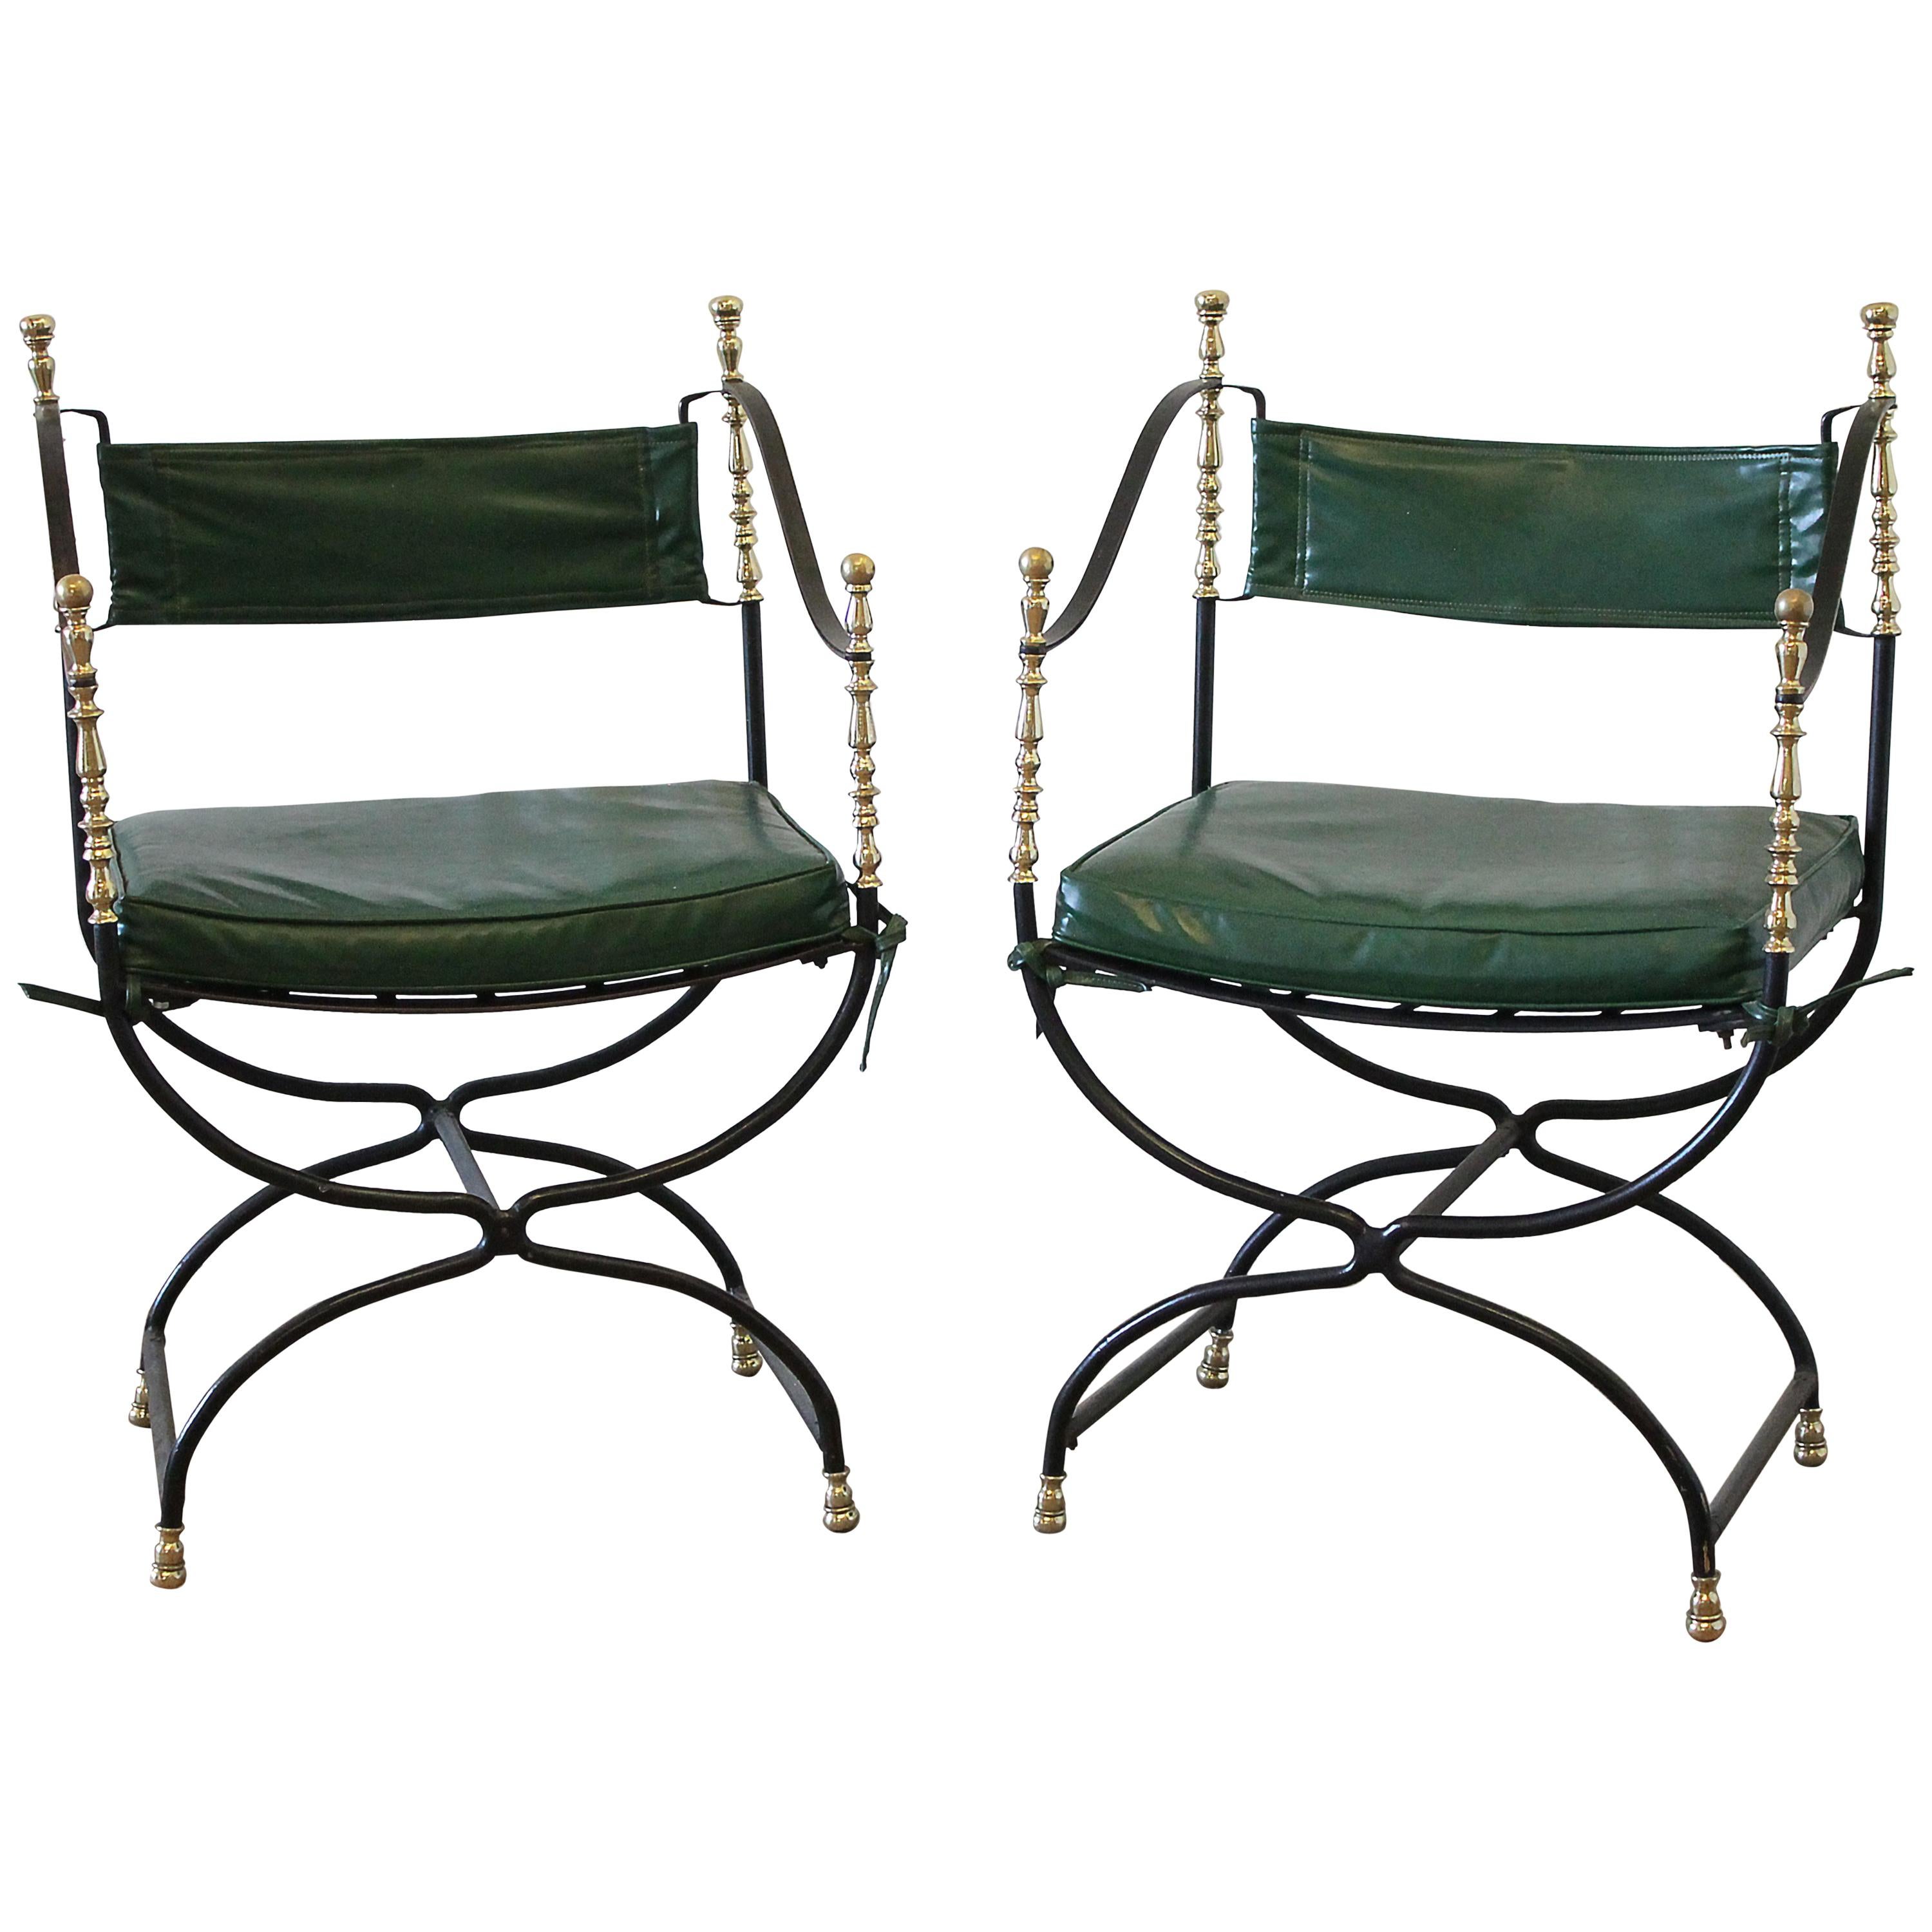 Pair of Iron and Brass Campaign Chairs